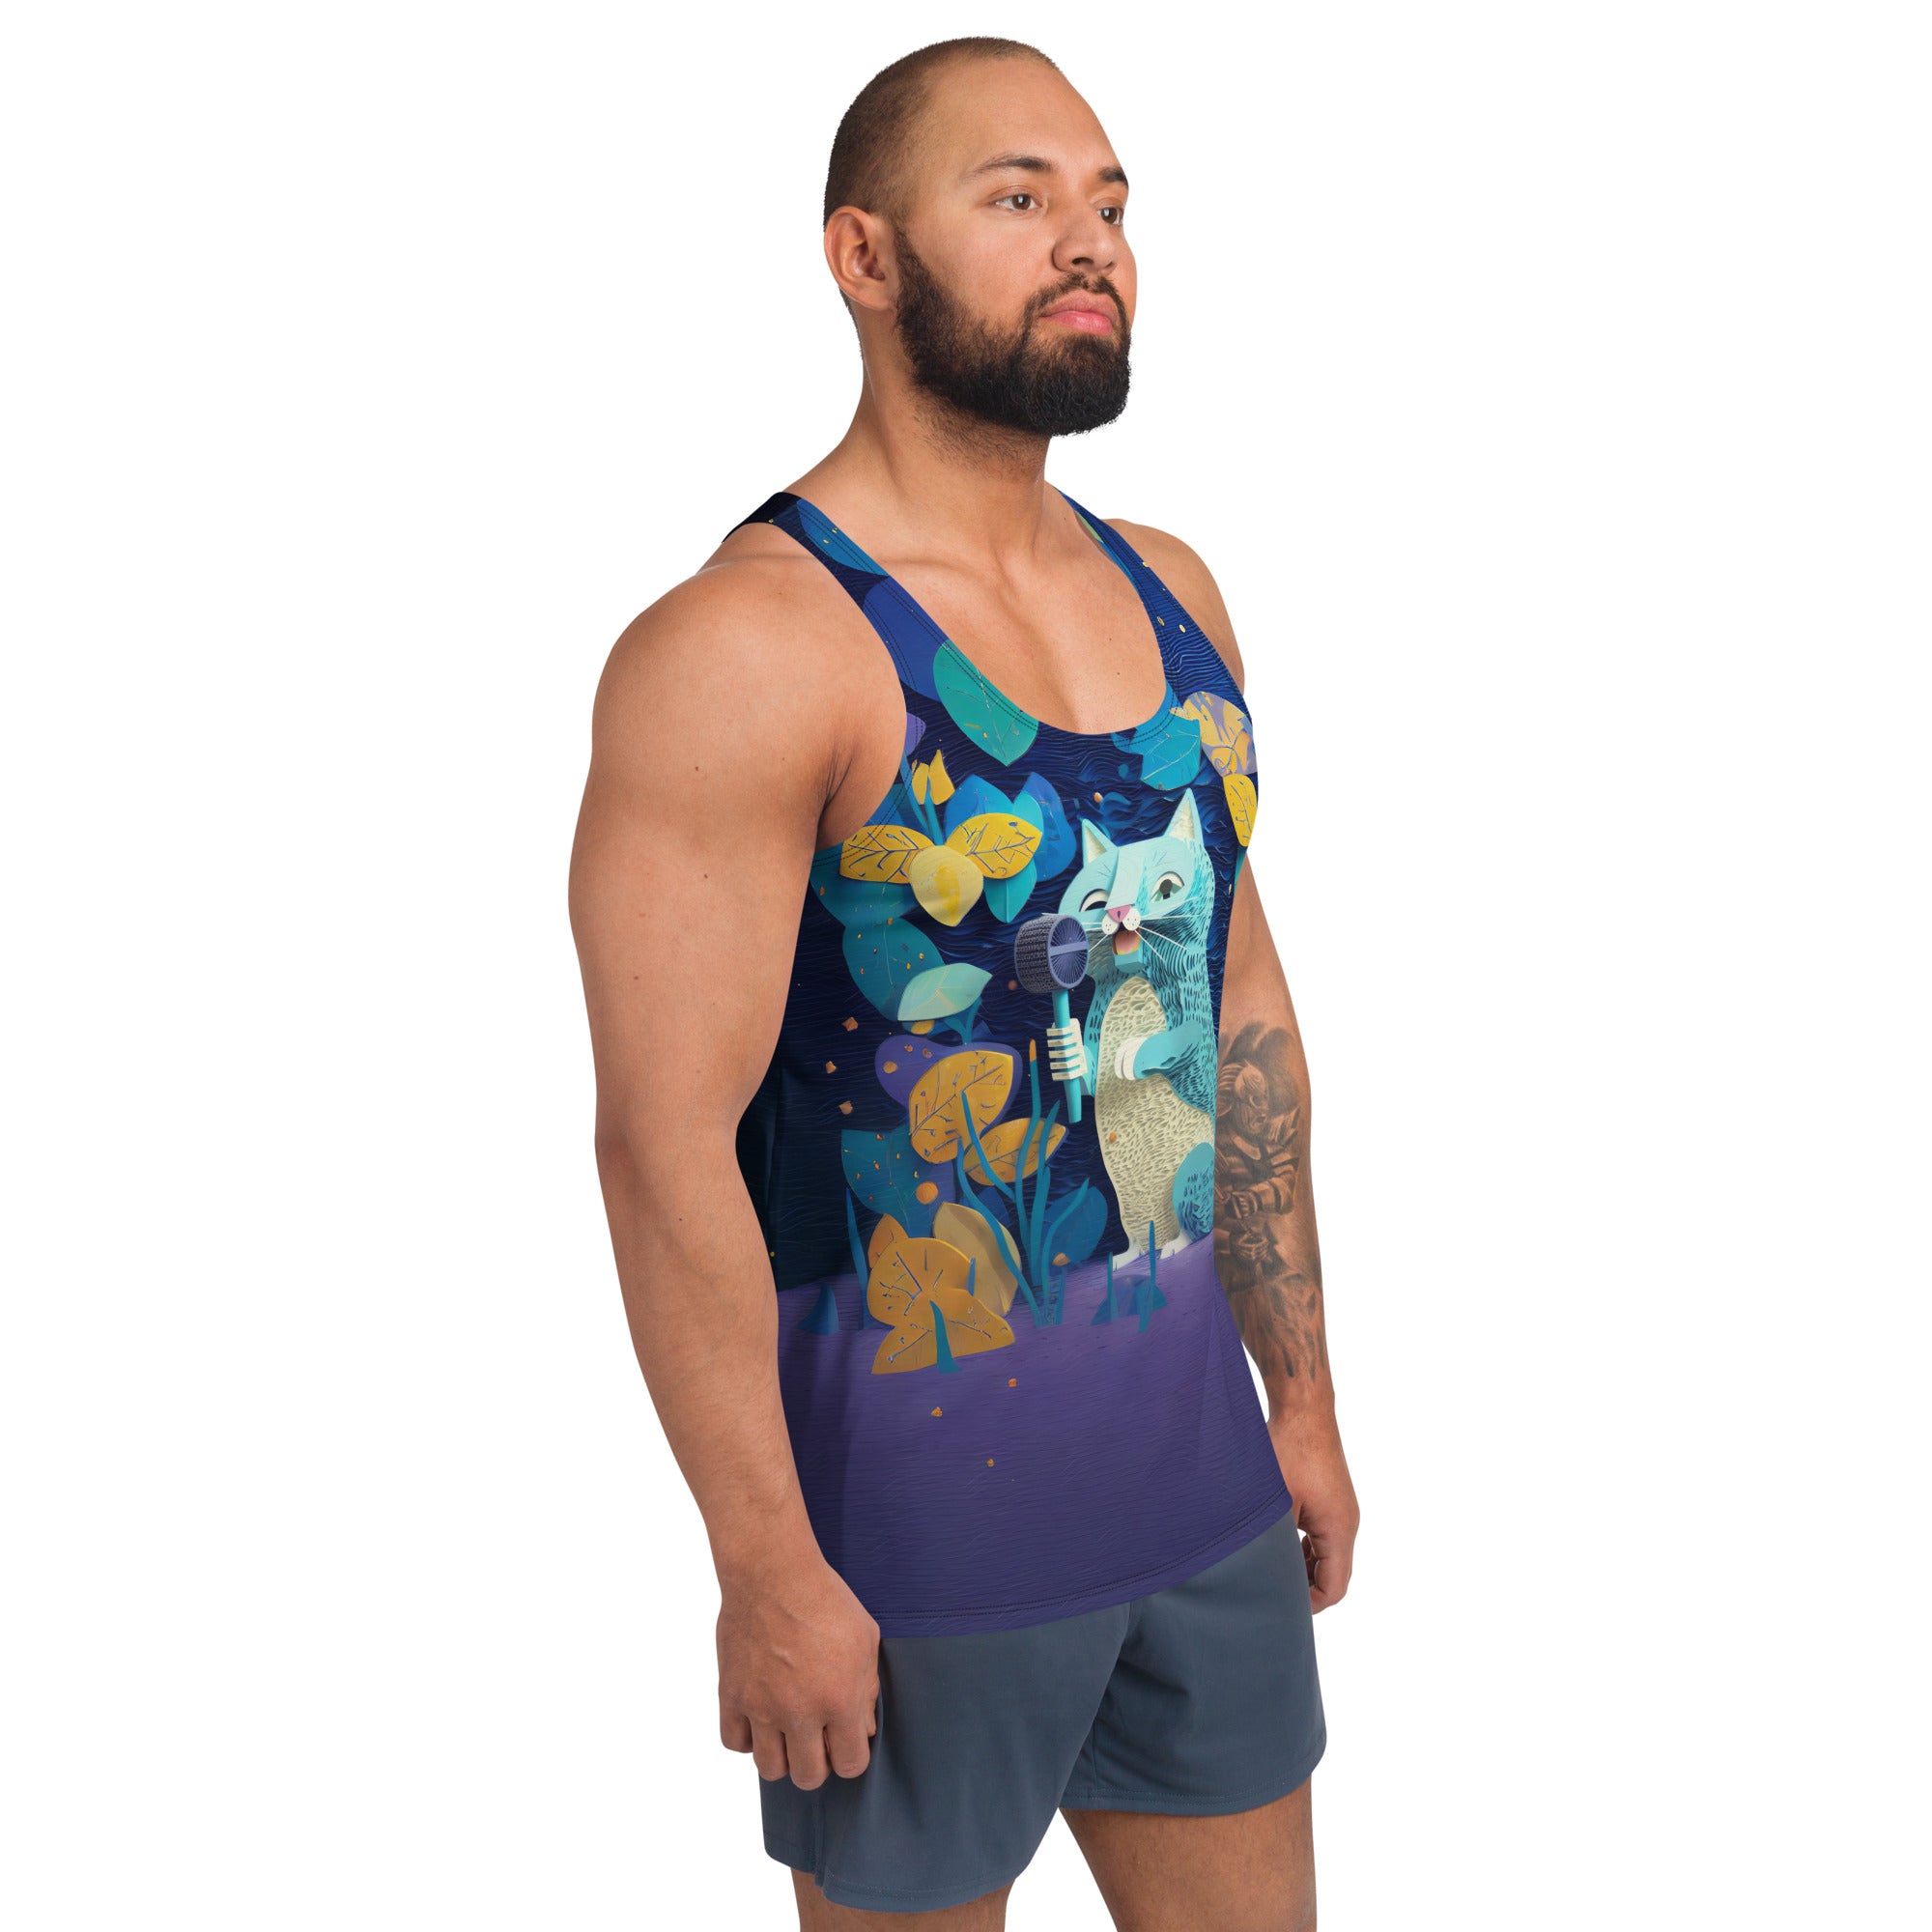 Men's casual tank top with Origami Turtle Oasis design.